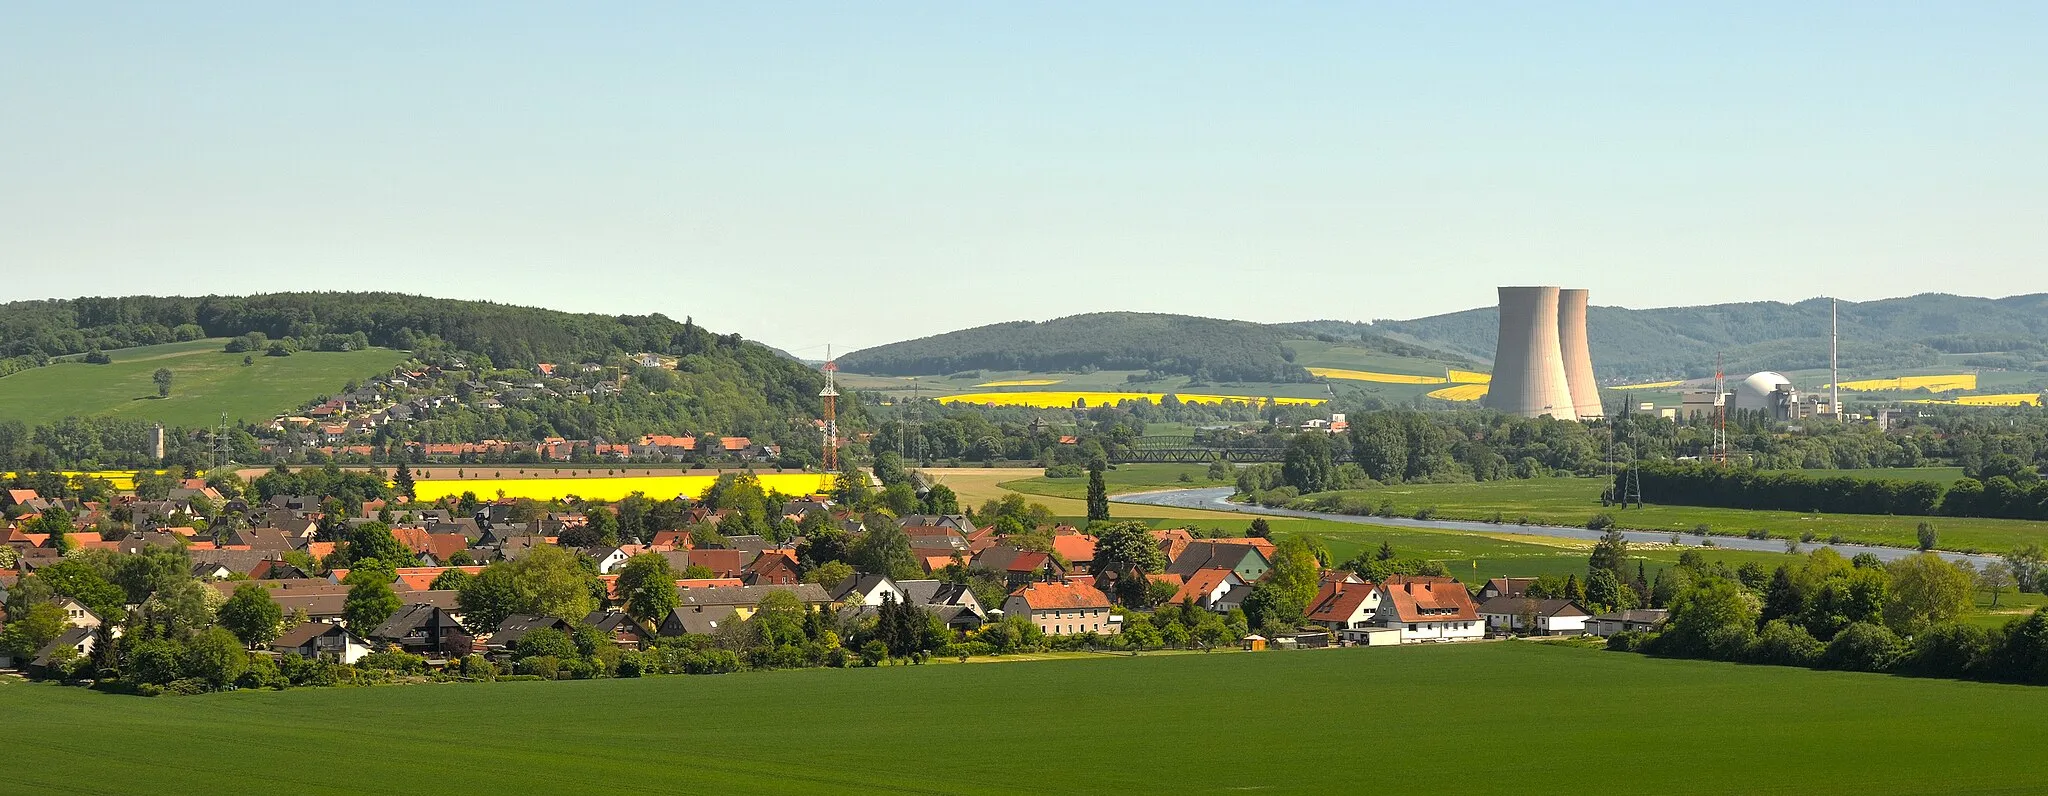 Photo showing: View from the Ohrbergpark to the small village Tündern and to the Grohnde Nuclear Power Plant beside the river Weser in the Upper Weser Valley and the Weser Uplands in Lower Saxony, Germany. The yellow fields are rapeseed fields.